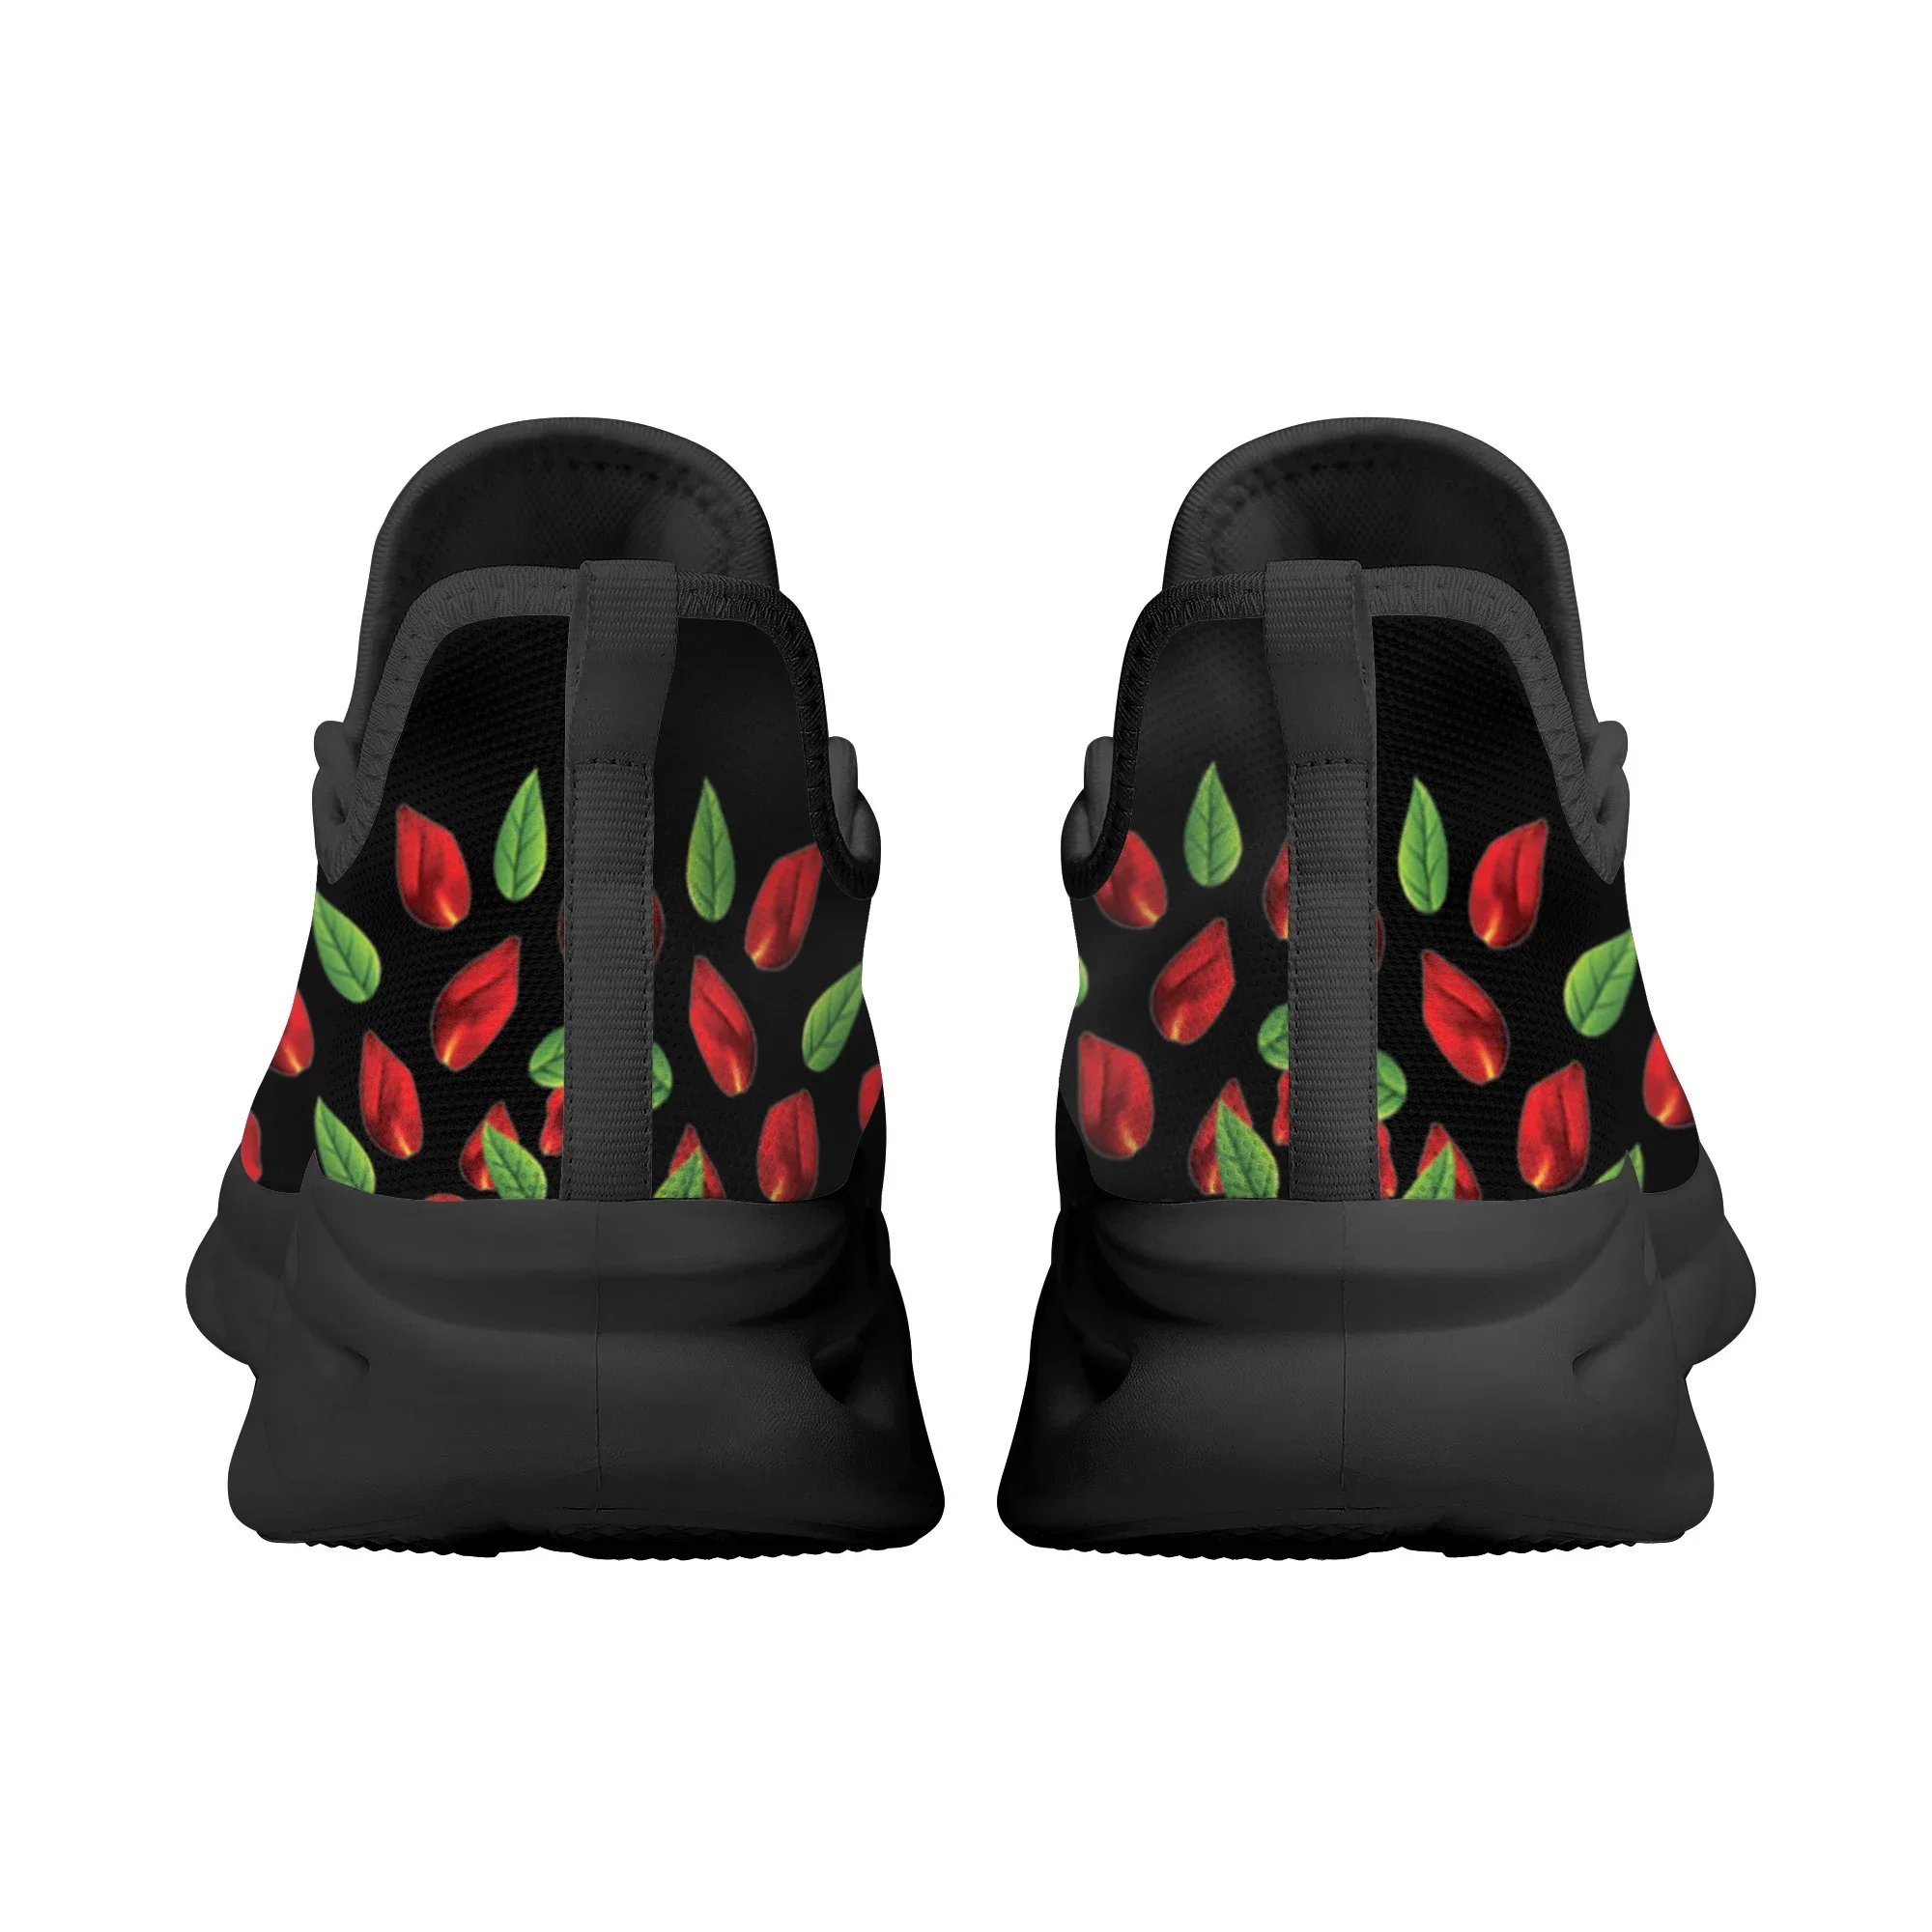 New Horror Skull Rose Brand Design Comfortable Running Shoes Gothic Trend Non-Slip Casual Lace Up Walking Shoes Chaussure Femme